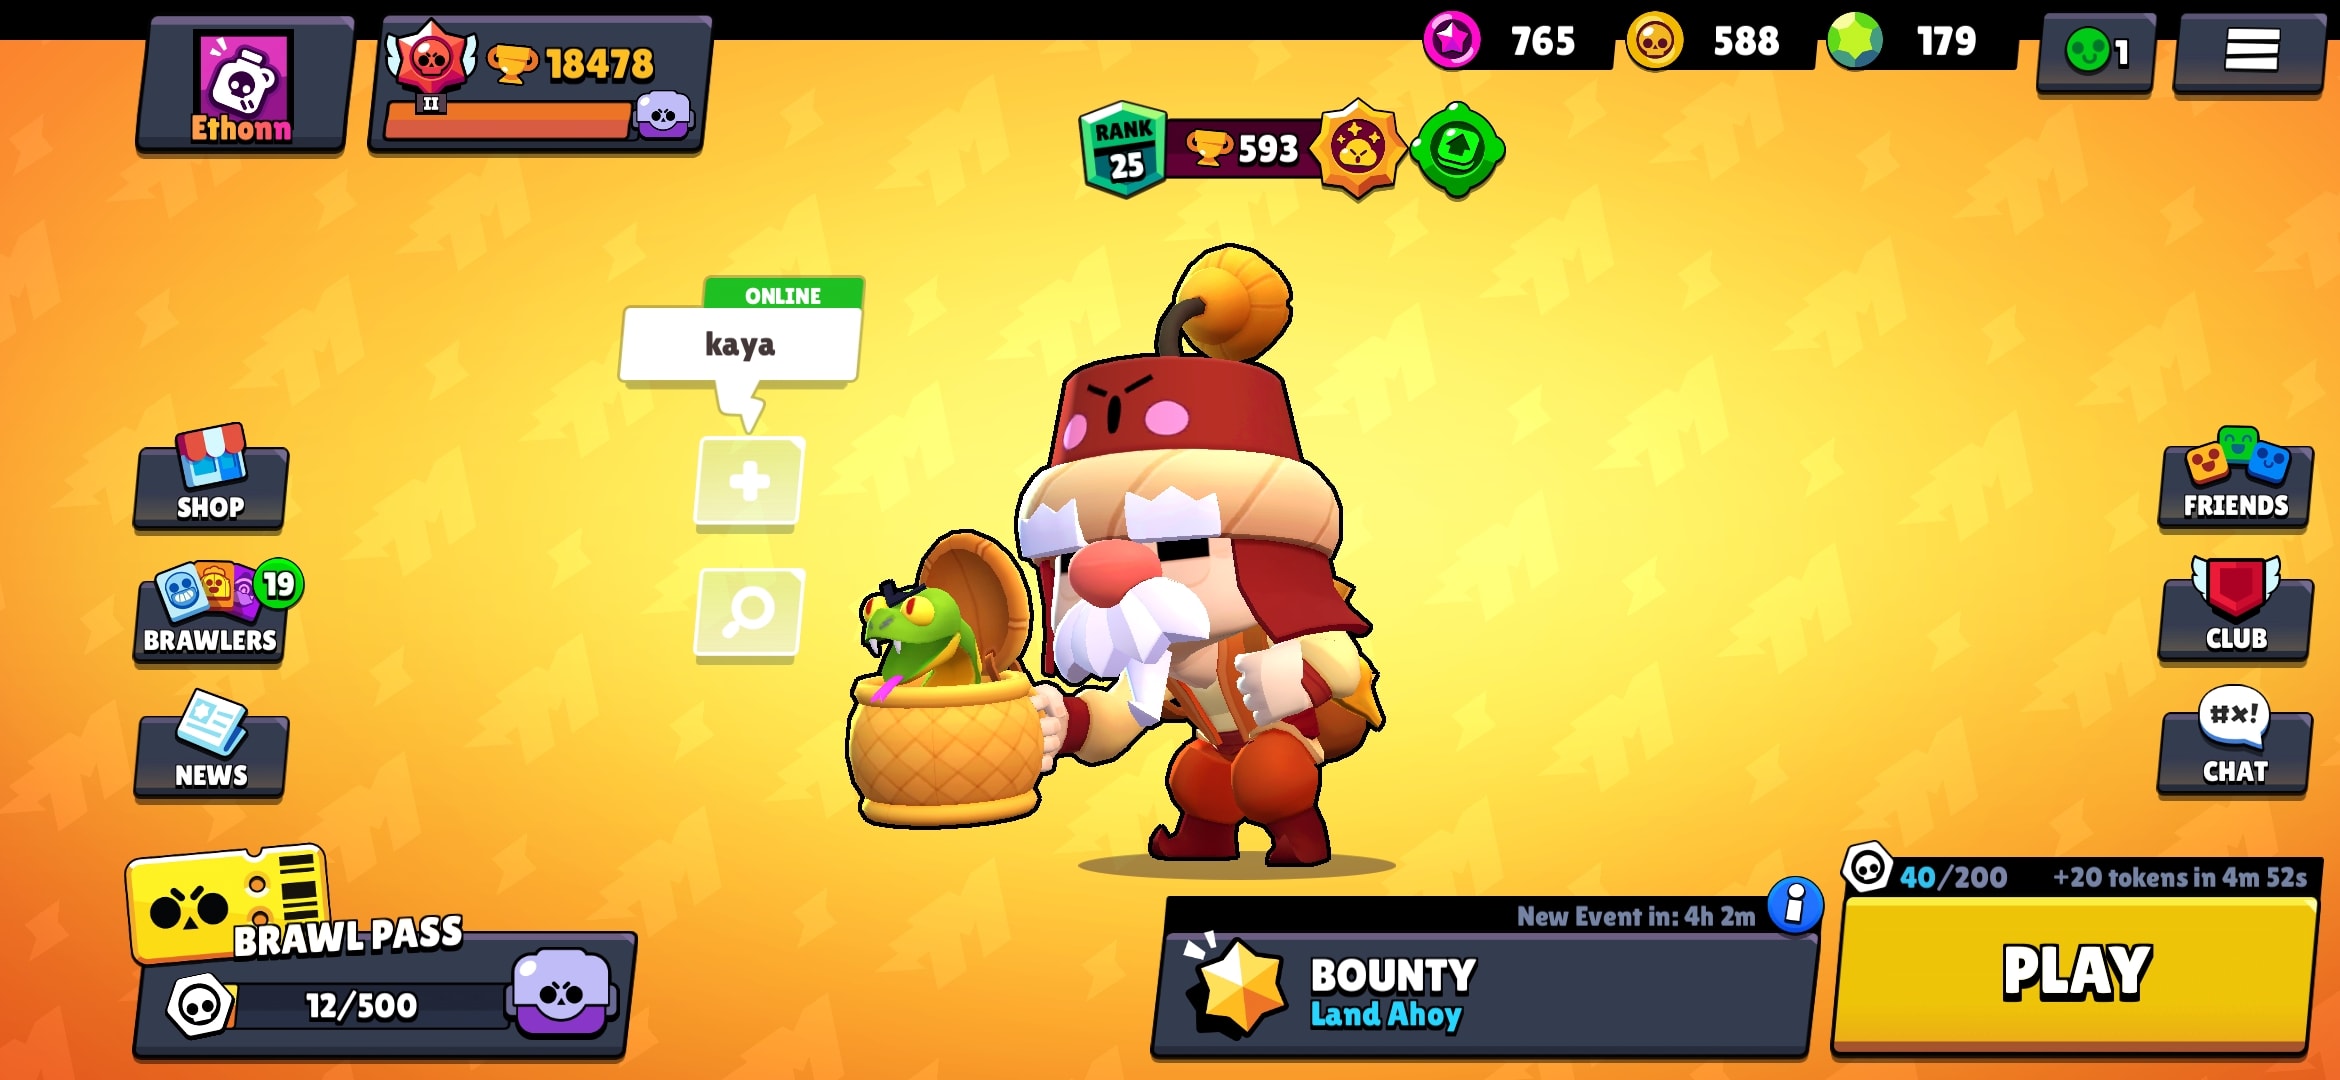 tips on how to play brawl stars for beginners